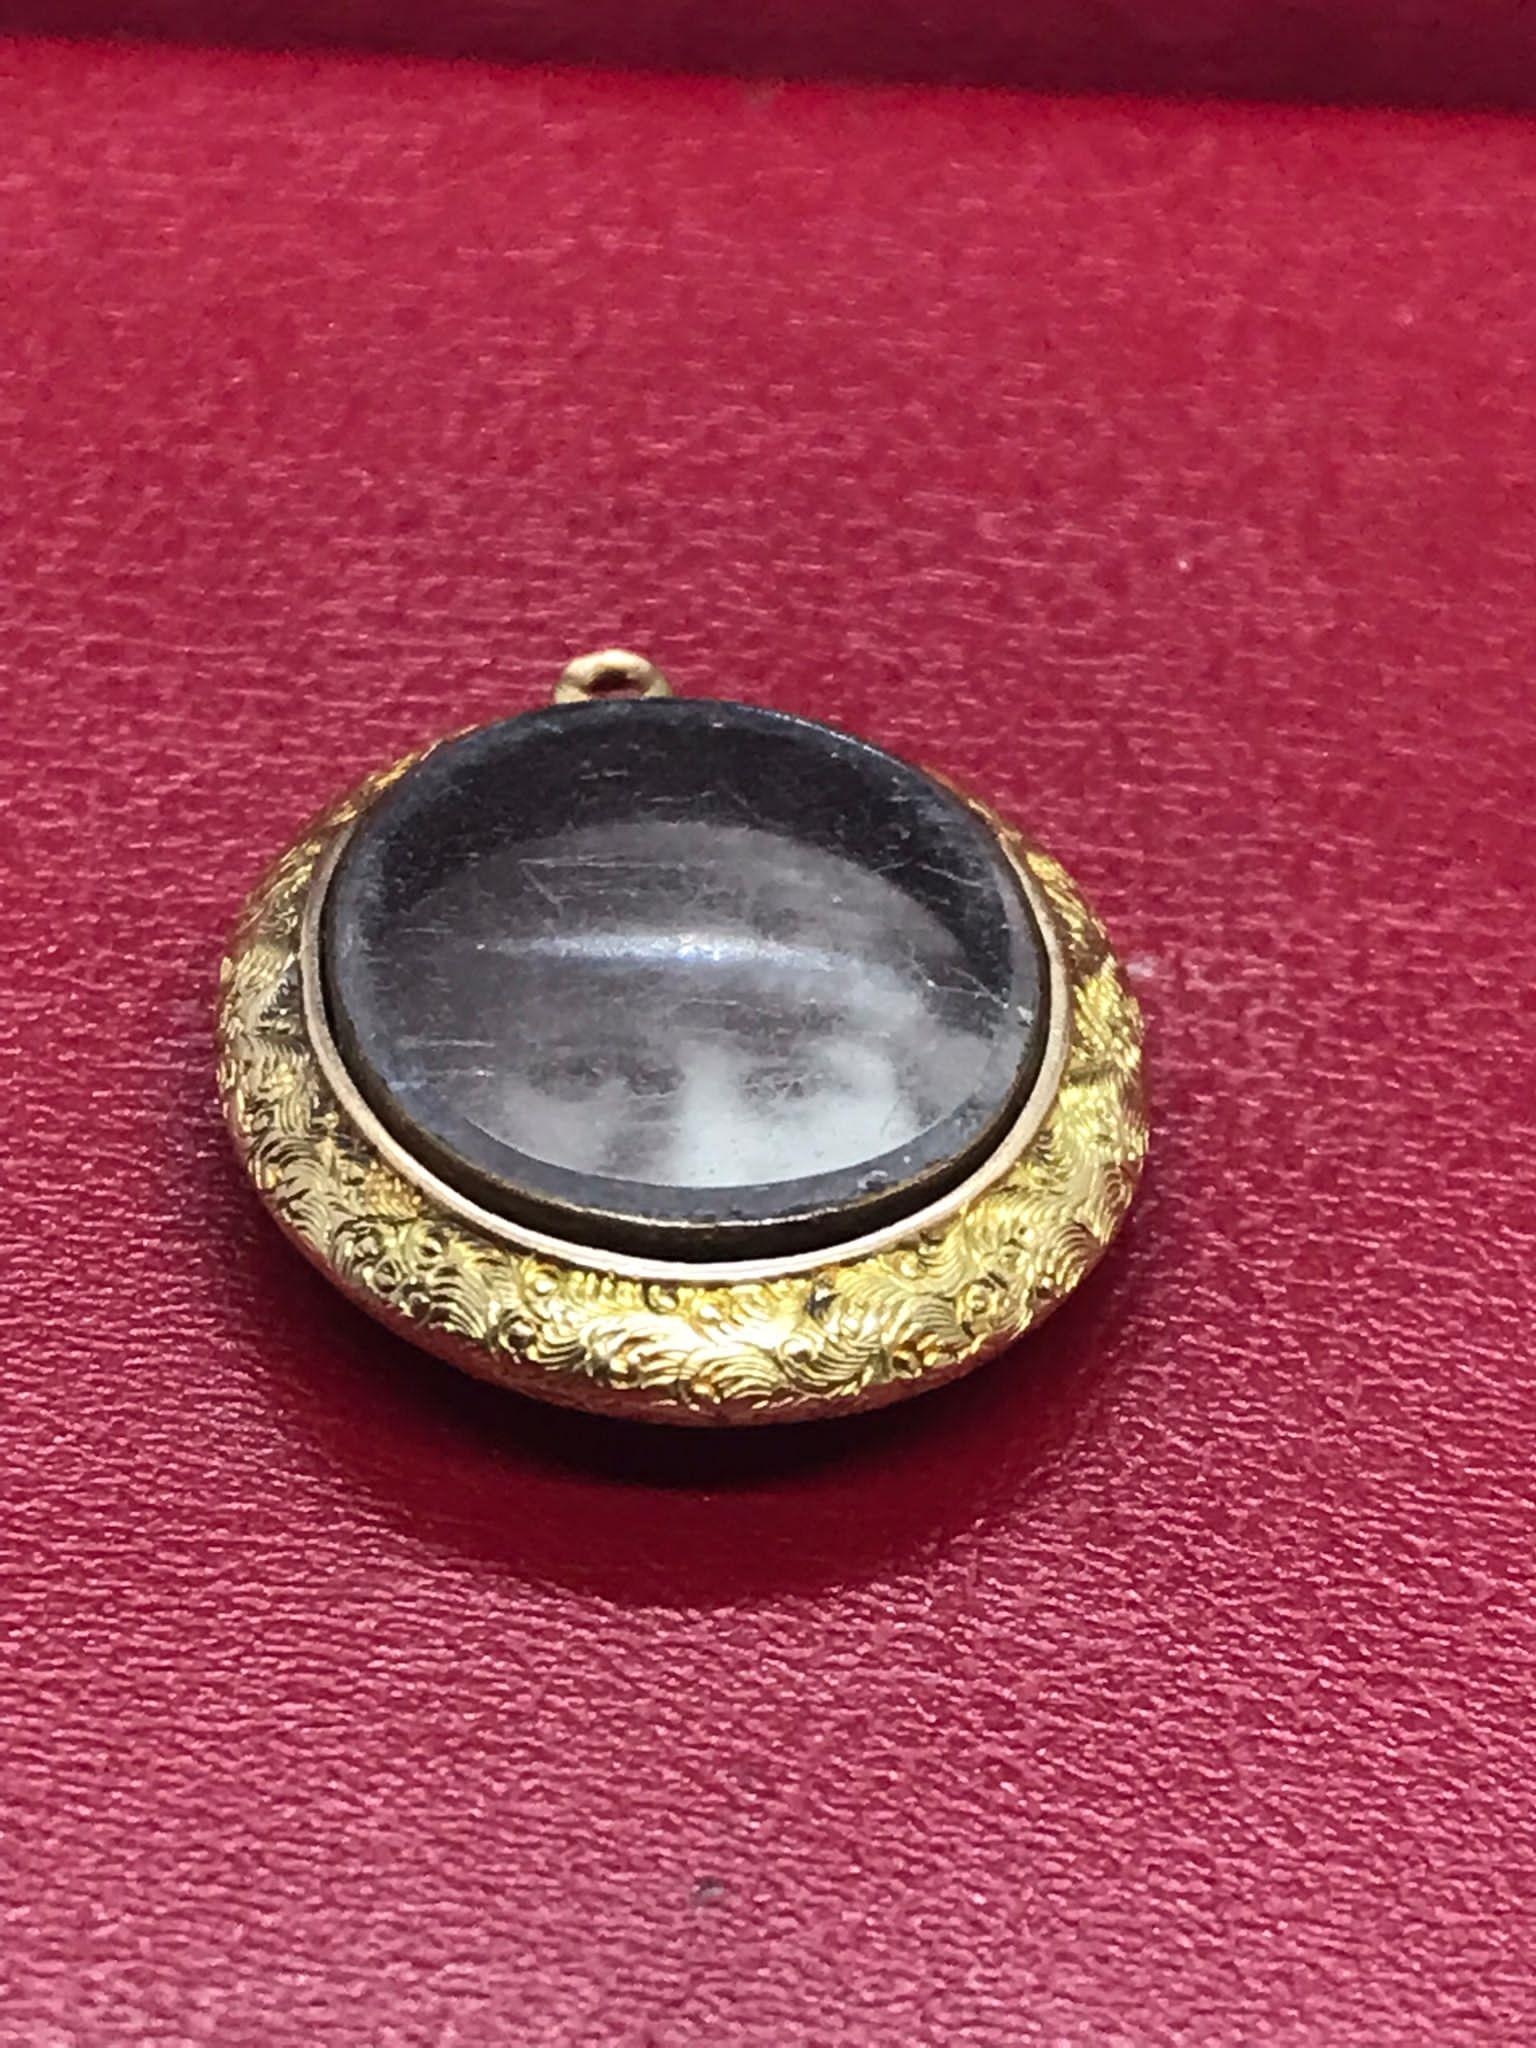 Antique 19th century enamel 15ct gold tested mourning locket pendant 3.1cm BY 2.3cm 4 grams - Image 12 of 12